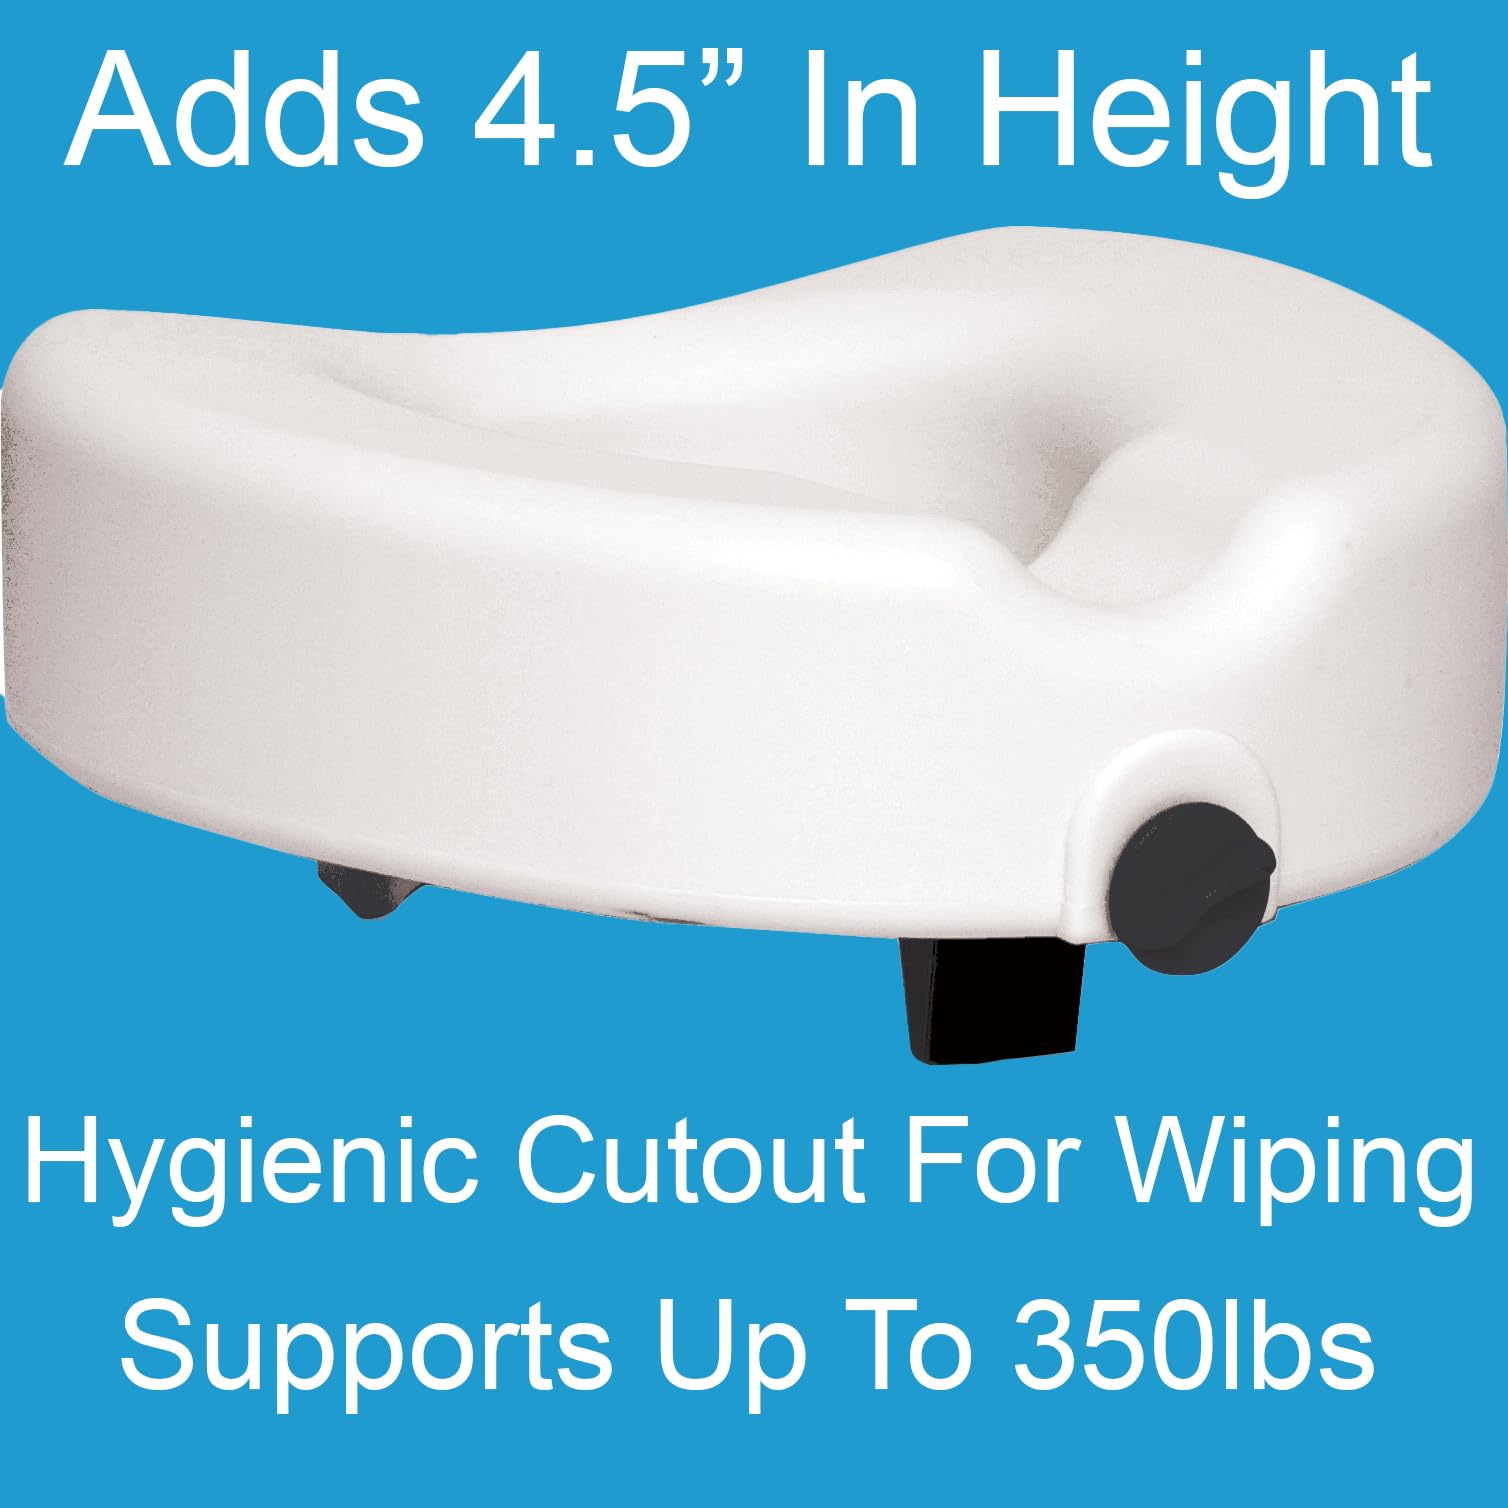 ProBasics Raised Toilet Seat For Seniors With Safety Lock, Round or Elongated Toilets, Secure Locking Mechanism, 4.5